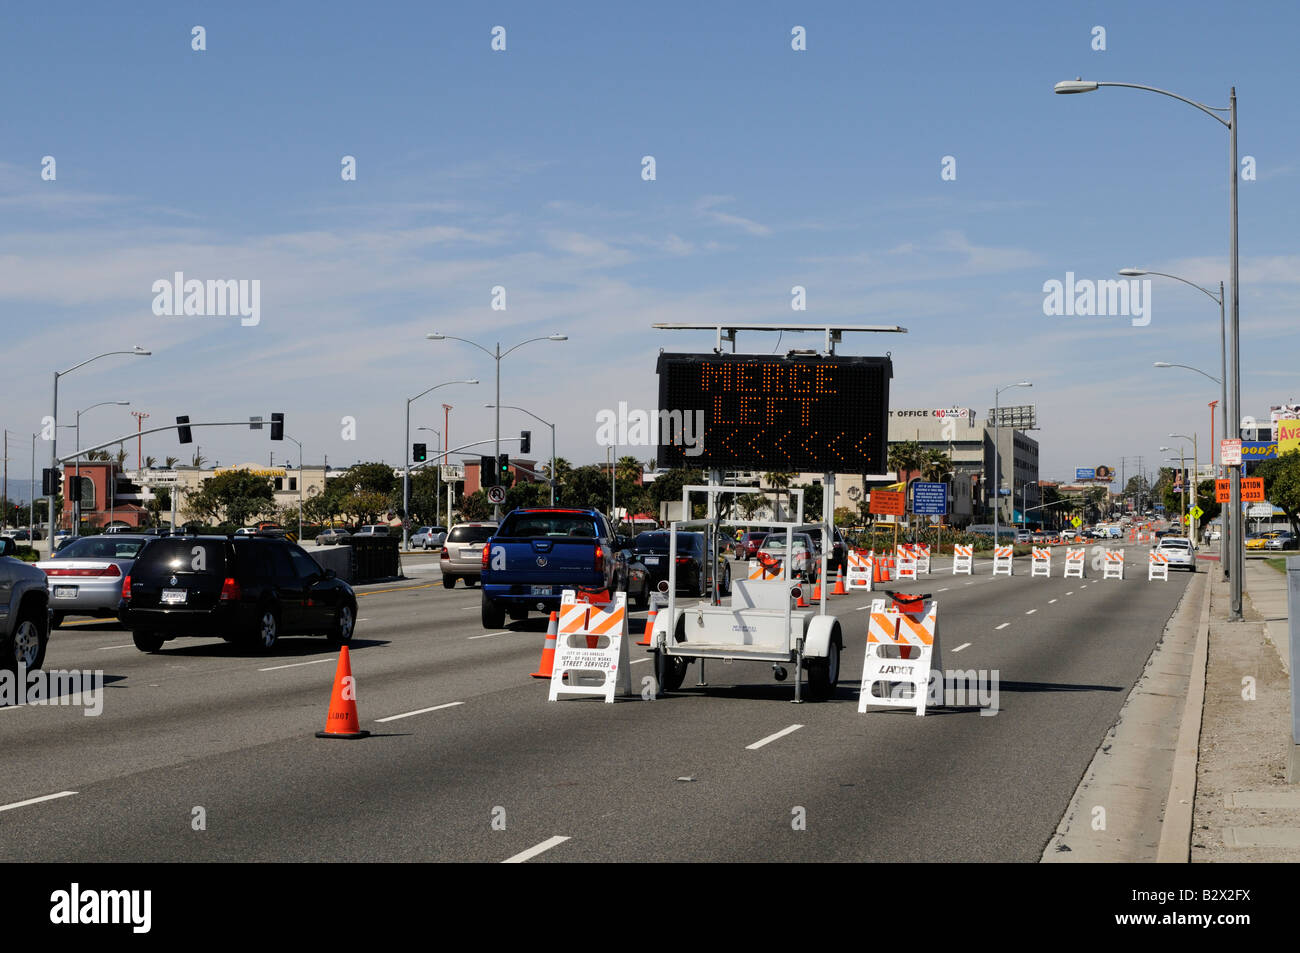 Street closure in Los Angeles for work Stock Photo